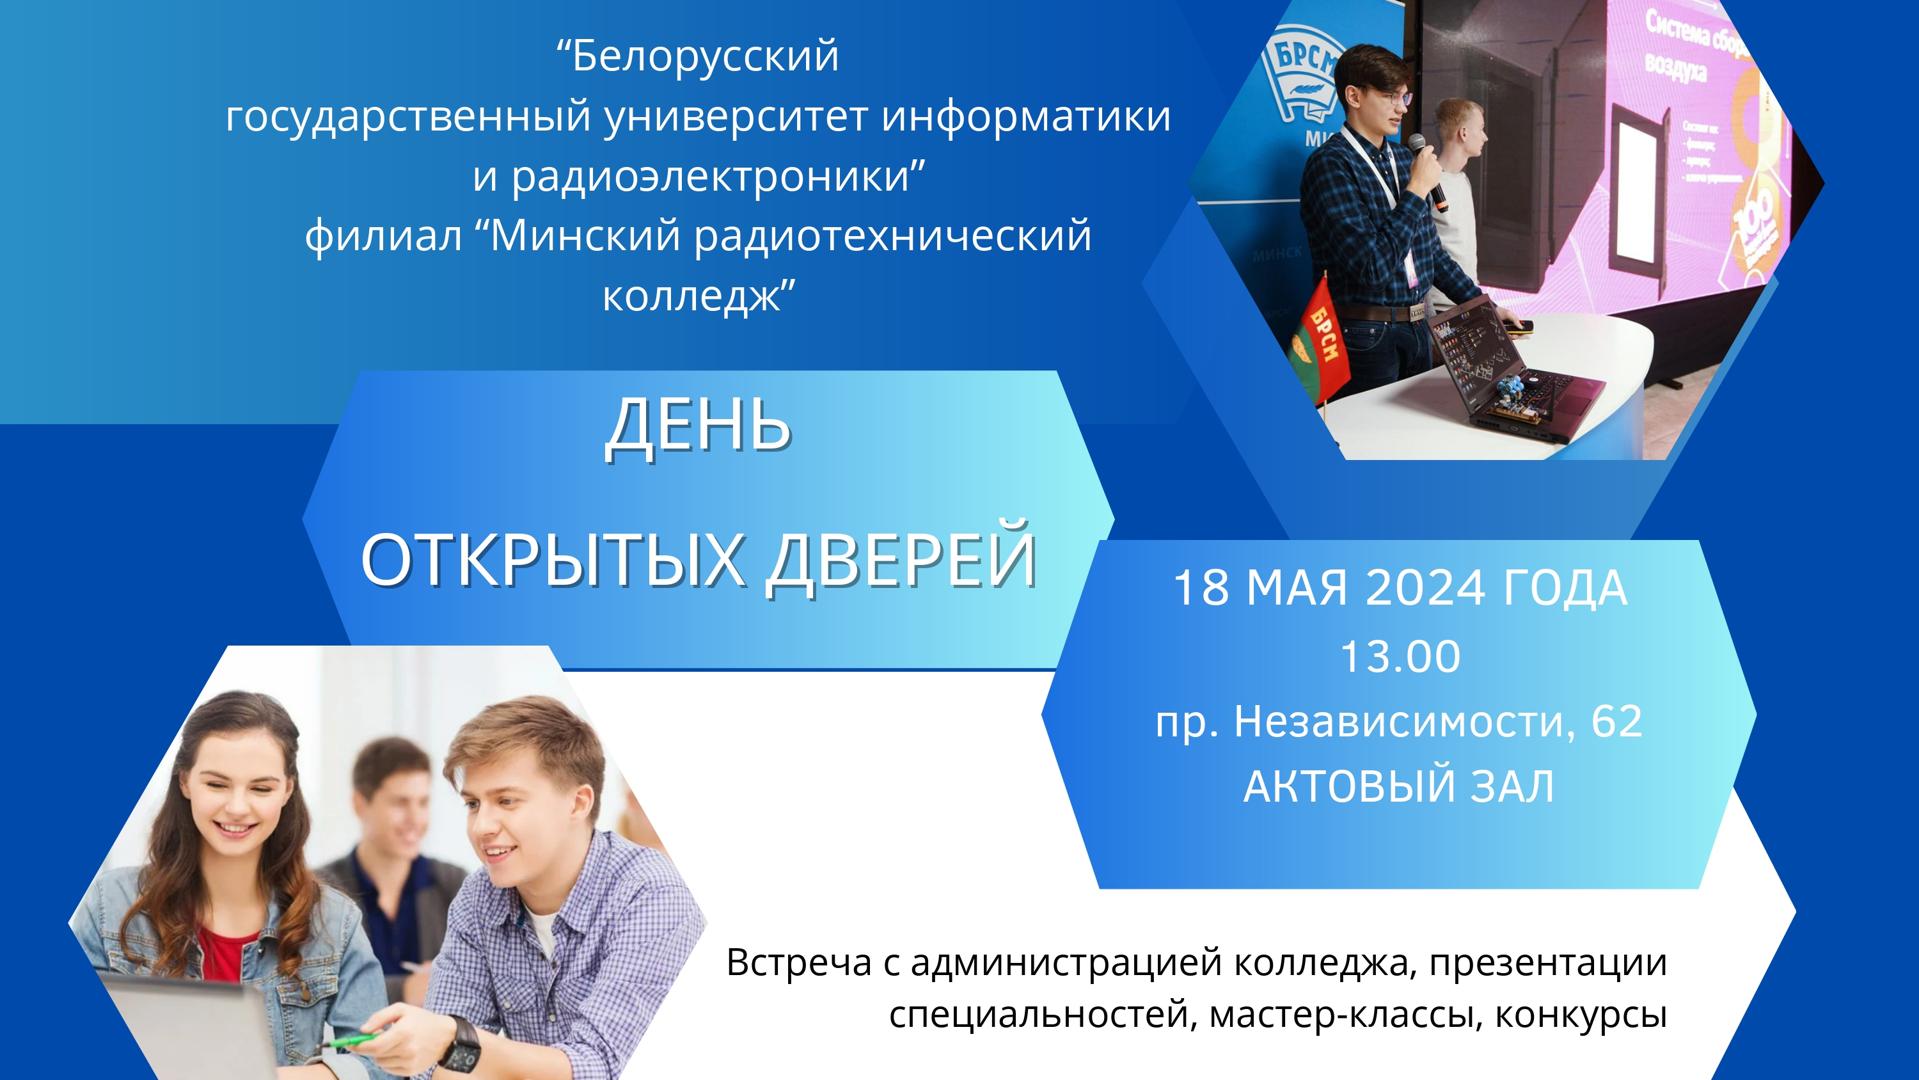 Open day at the BSUIR branch "Minsk Radio Engineering College" on May 18, 2024